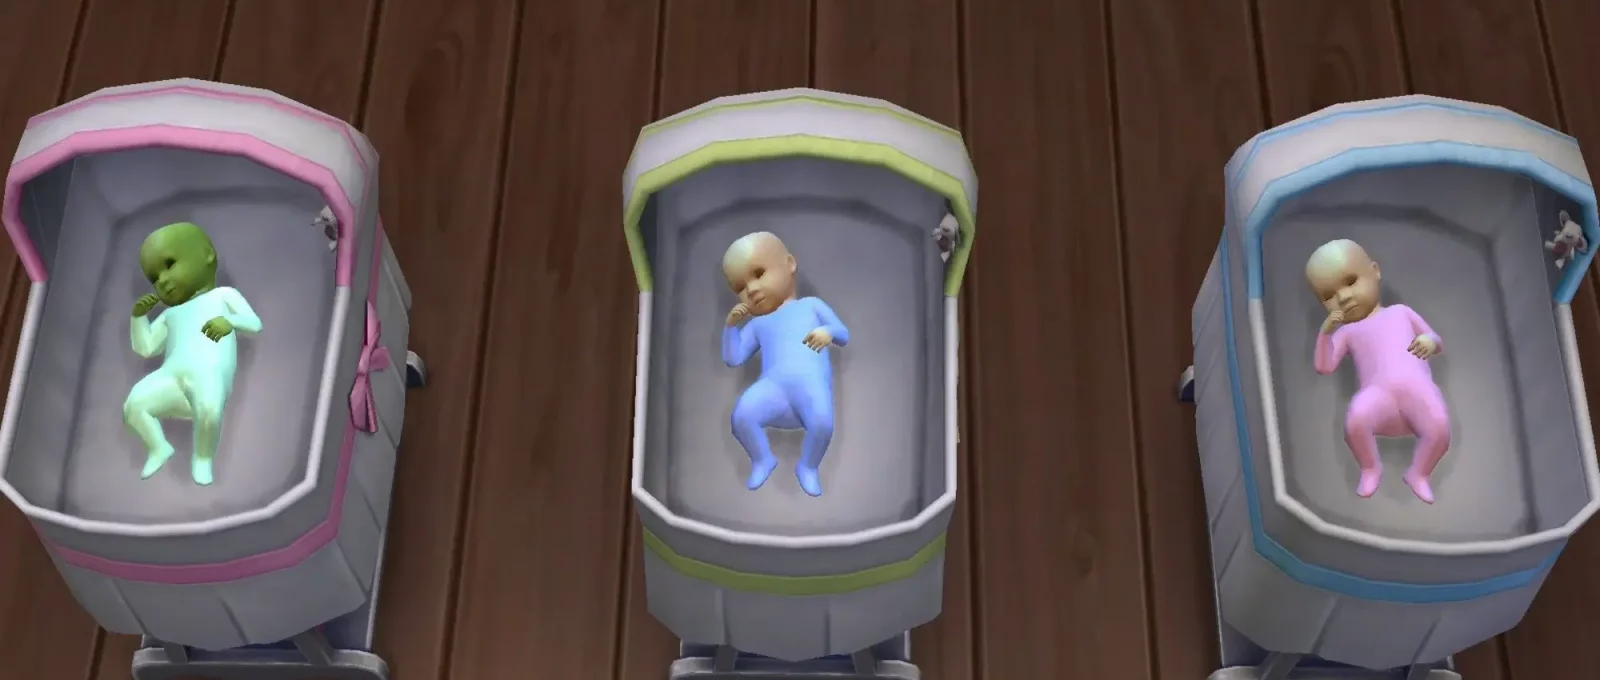 The Sims 4 Babies 1